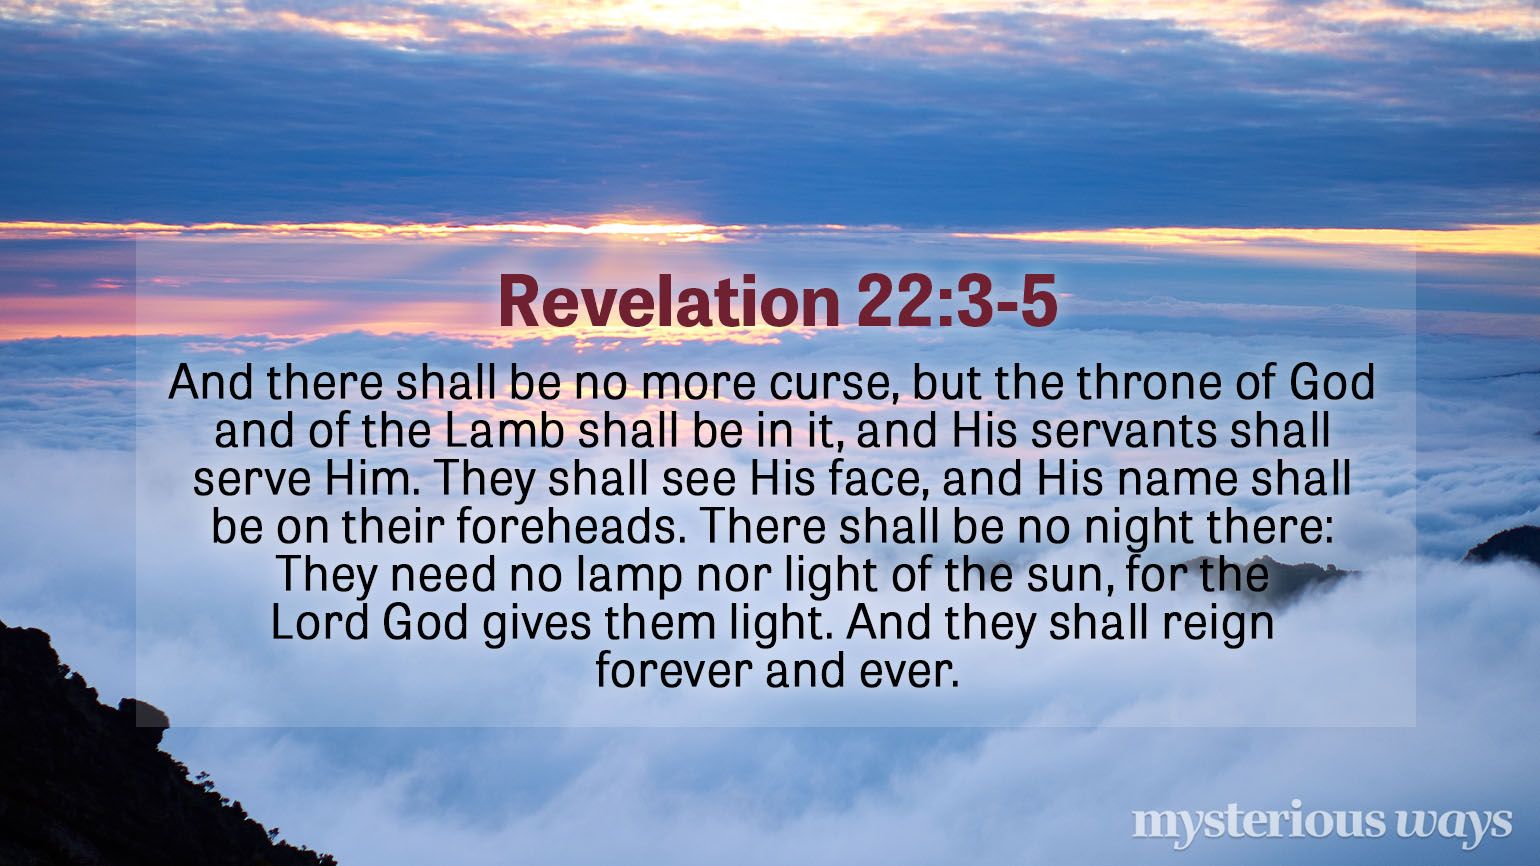 Revelation 22:3-5 “And there shall be no more curse, but the throne of God and of the Lamb shall be in it, and His servants shall serve Him. They shall see His face, and His name shall be on their foreheads. There shall be no night there: They need no lamp nor light of the sun, for the Lord God gives them light. And they shall reign forever and ever.”